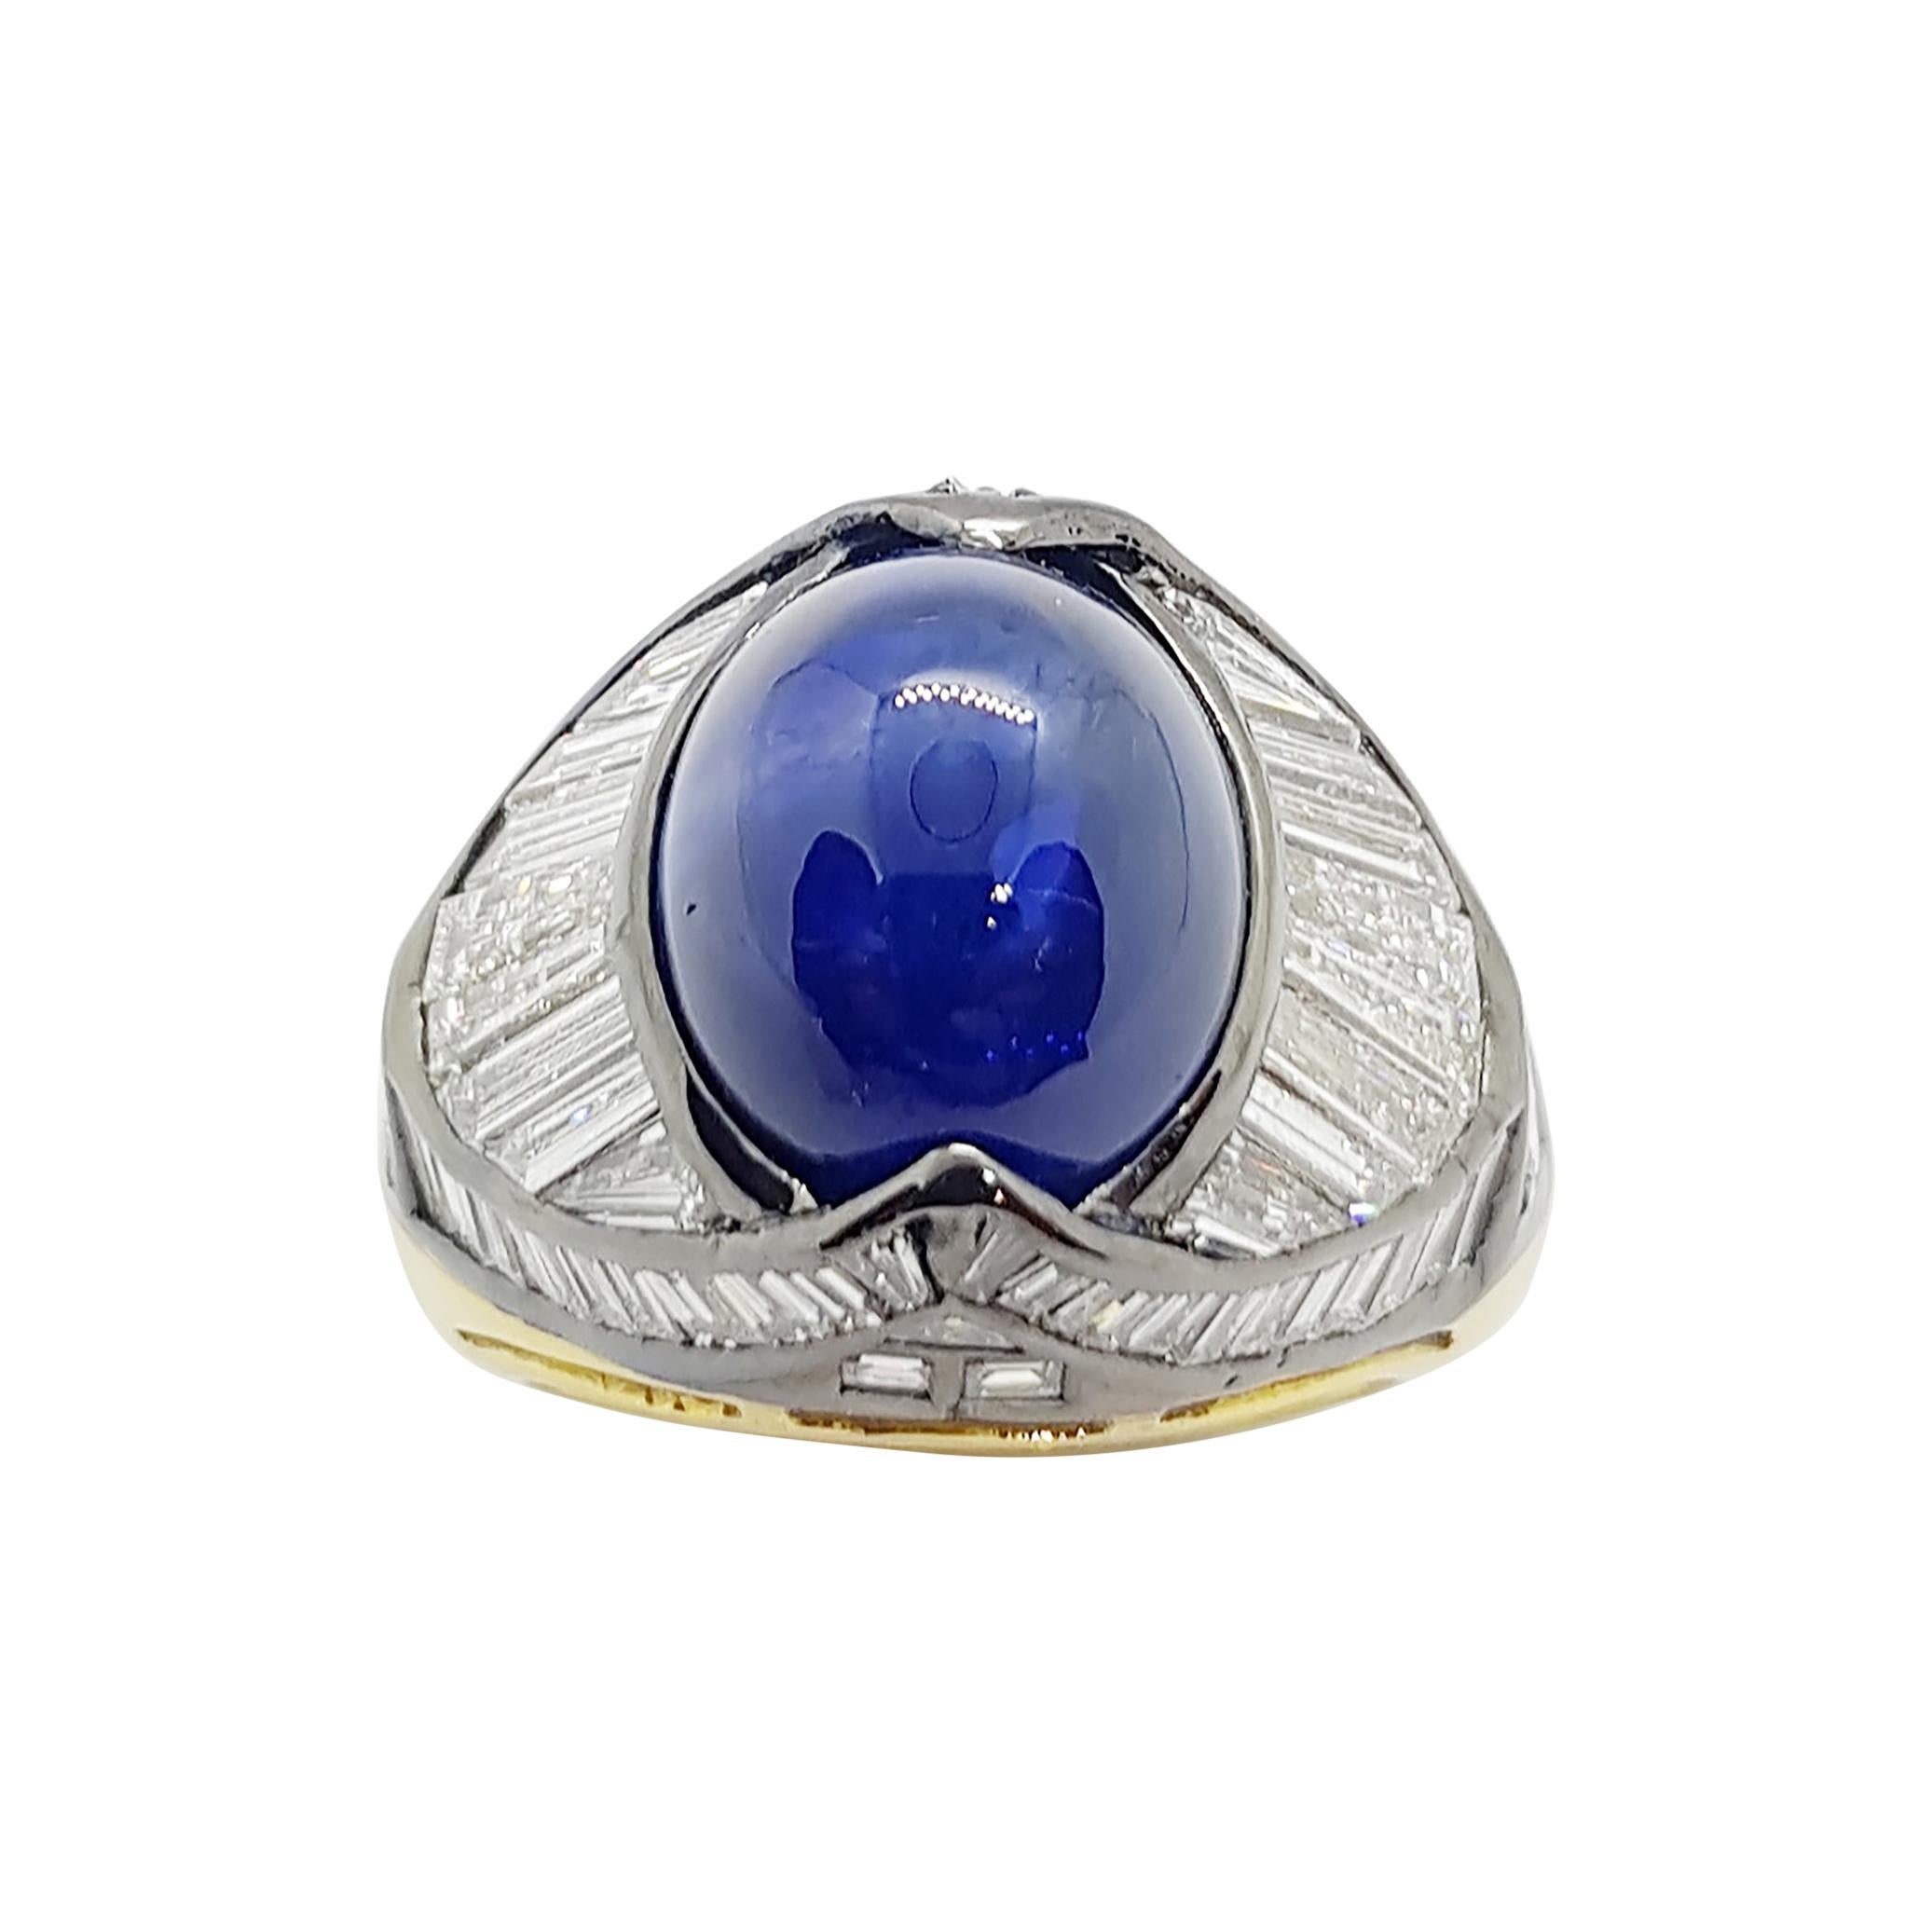 Cabochon Blue Sapphire with Diamond Ring Set in 18 Karat Gold Settings